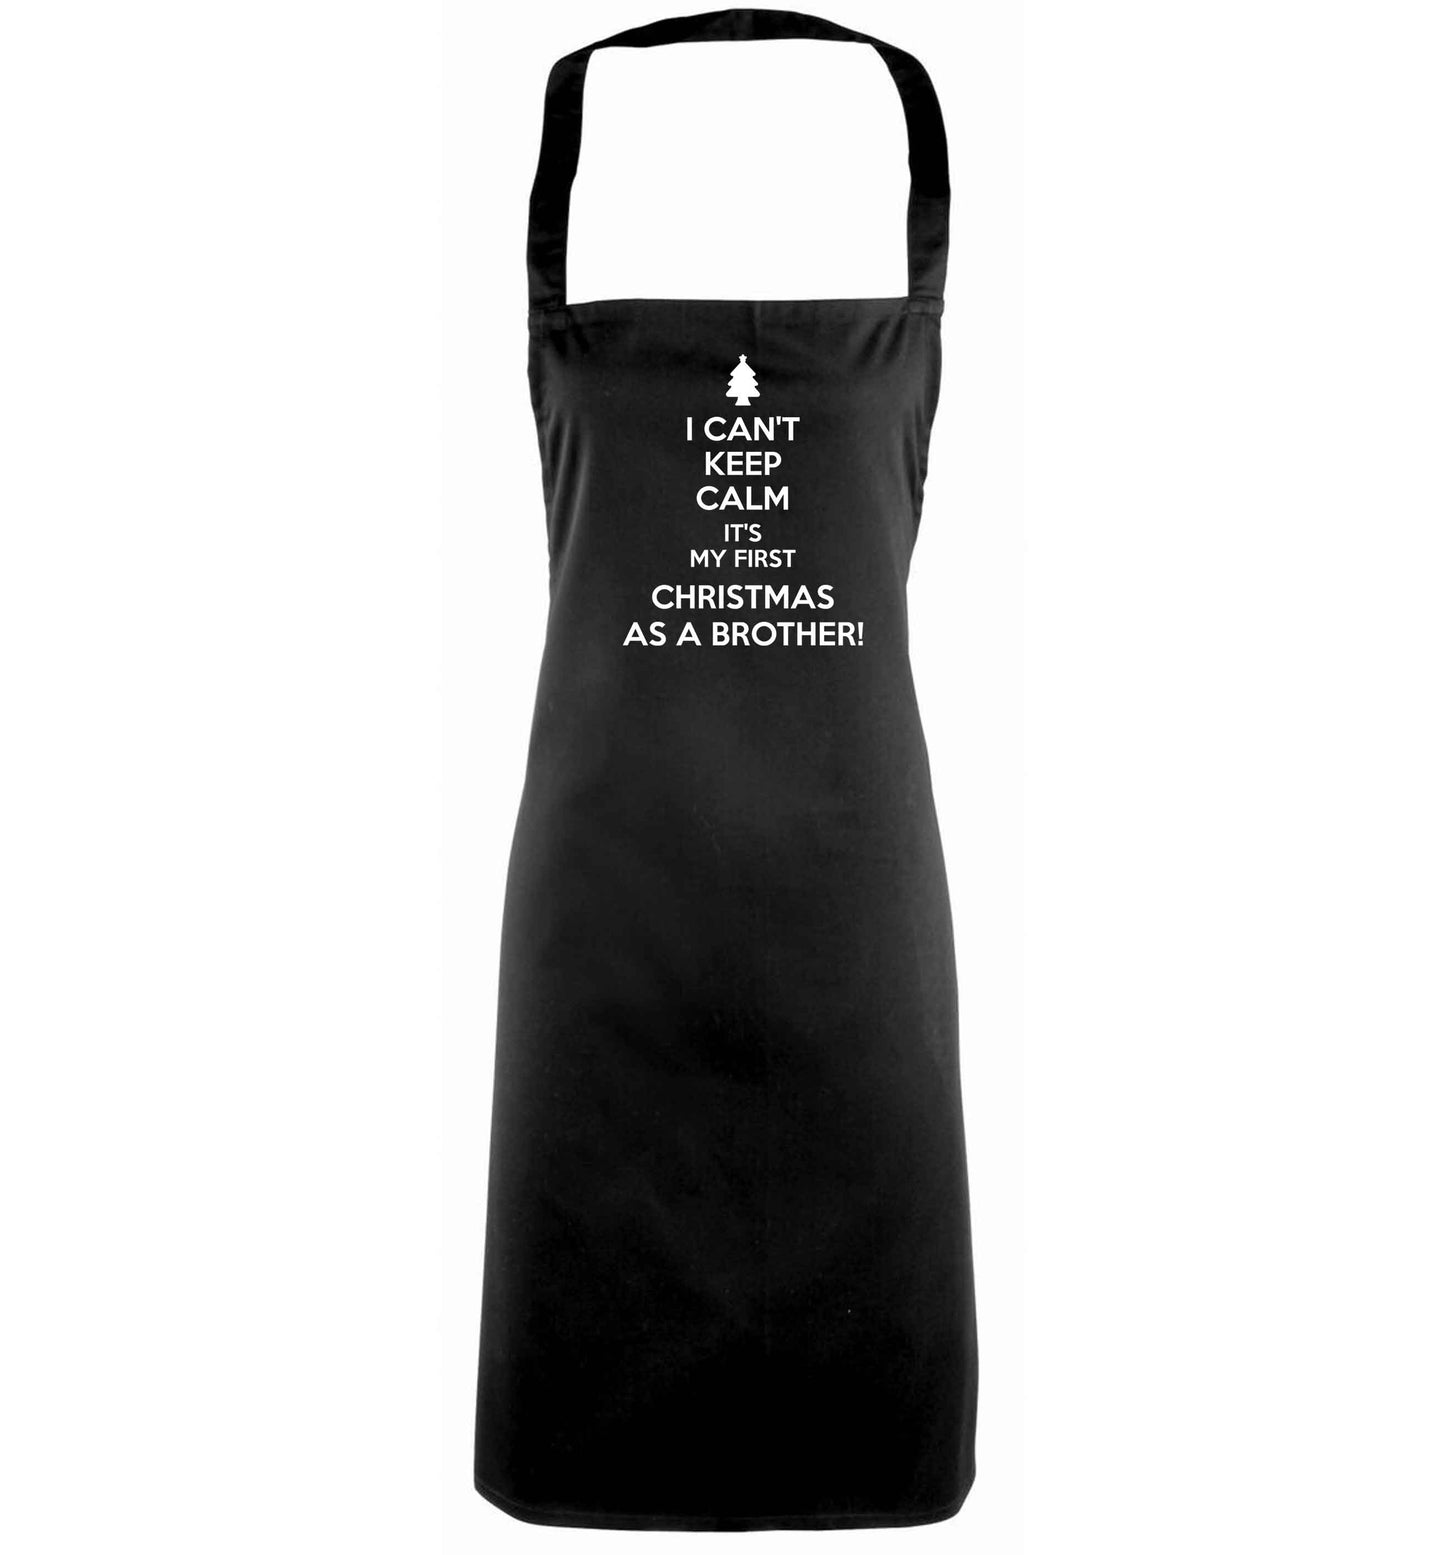 I can't keep calm it's my first Christmas as a brother! black apron